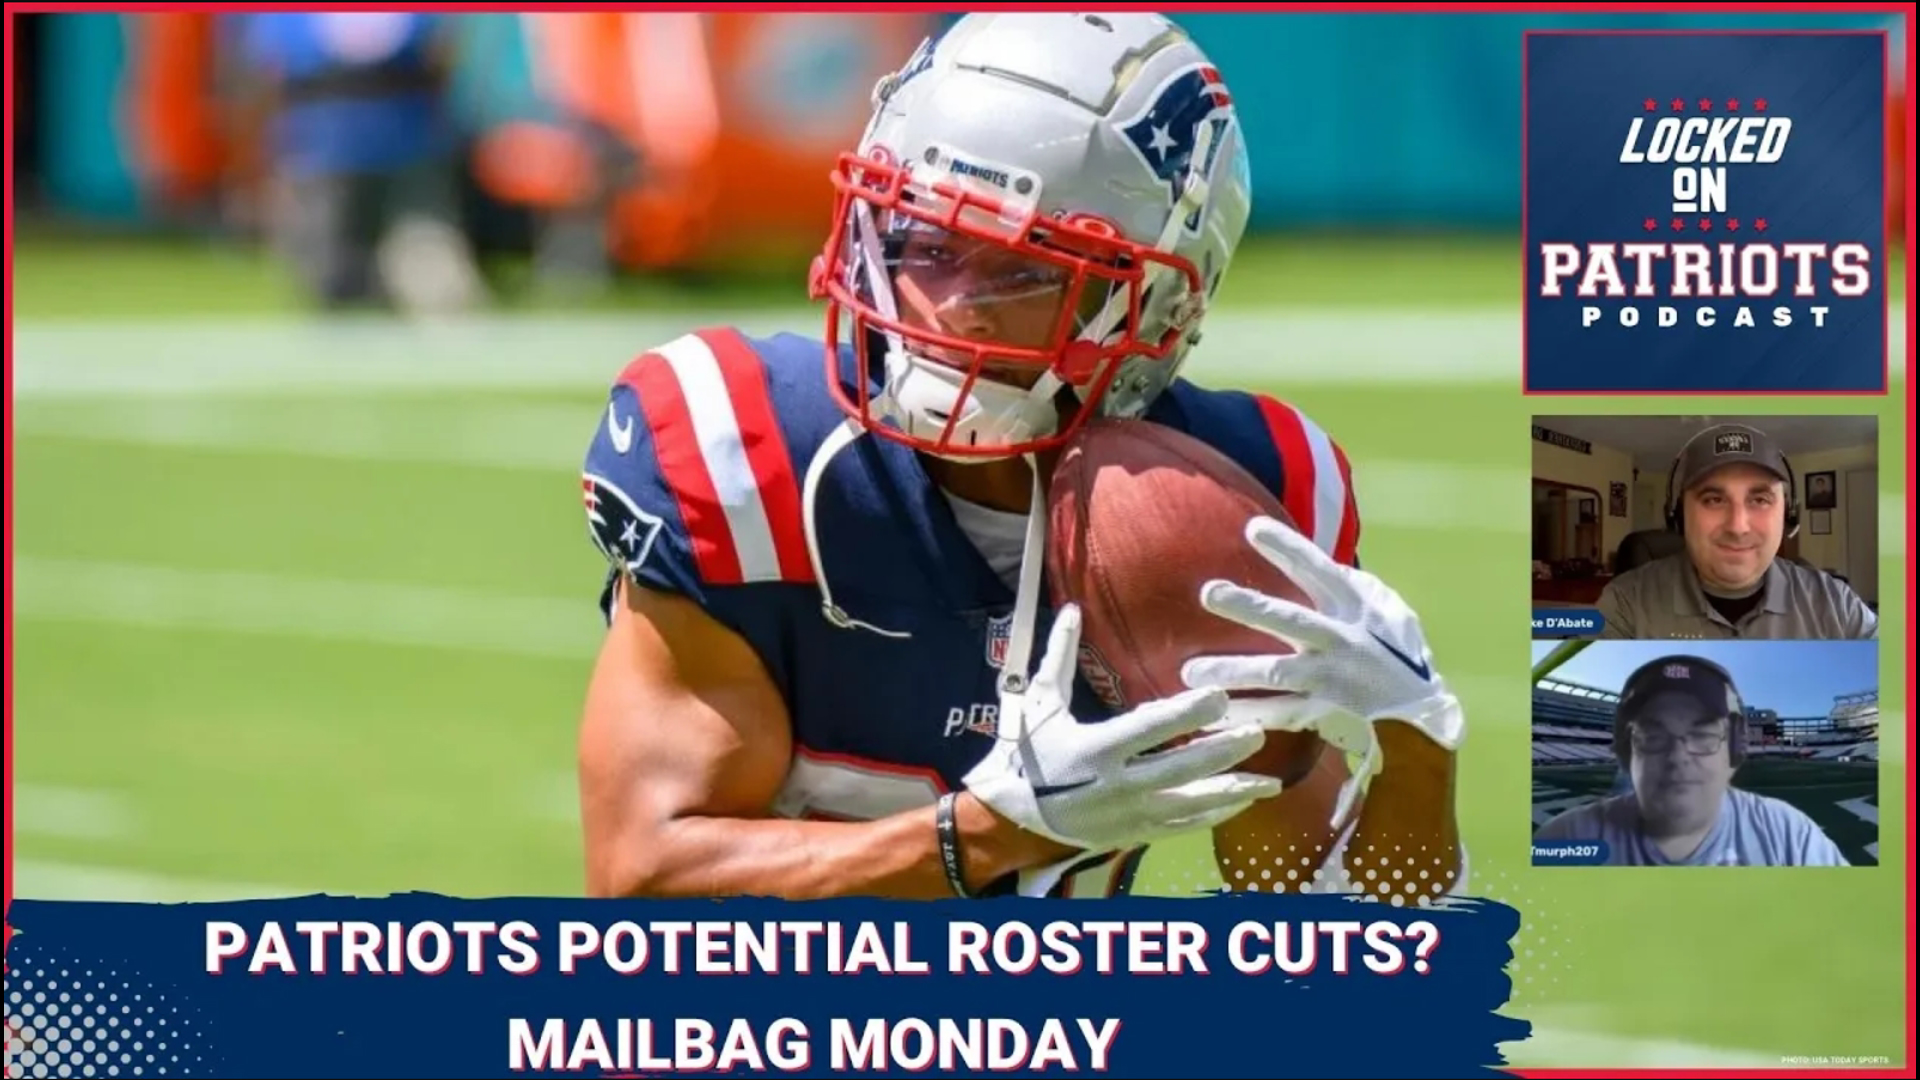 The New England Patriots are a team known for its surprises. However, do they have a surprise roster cut in store within the coming weeks?